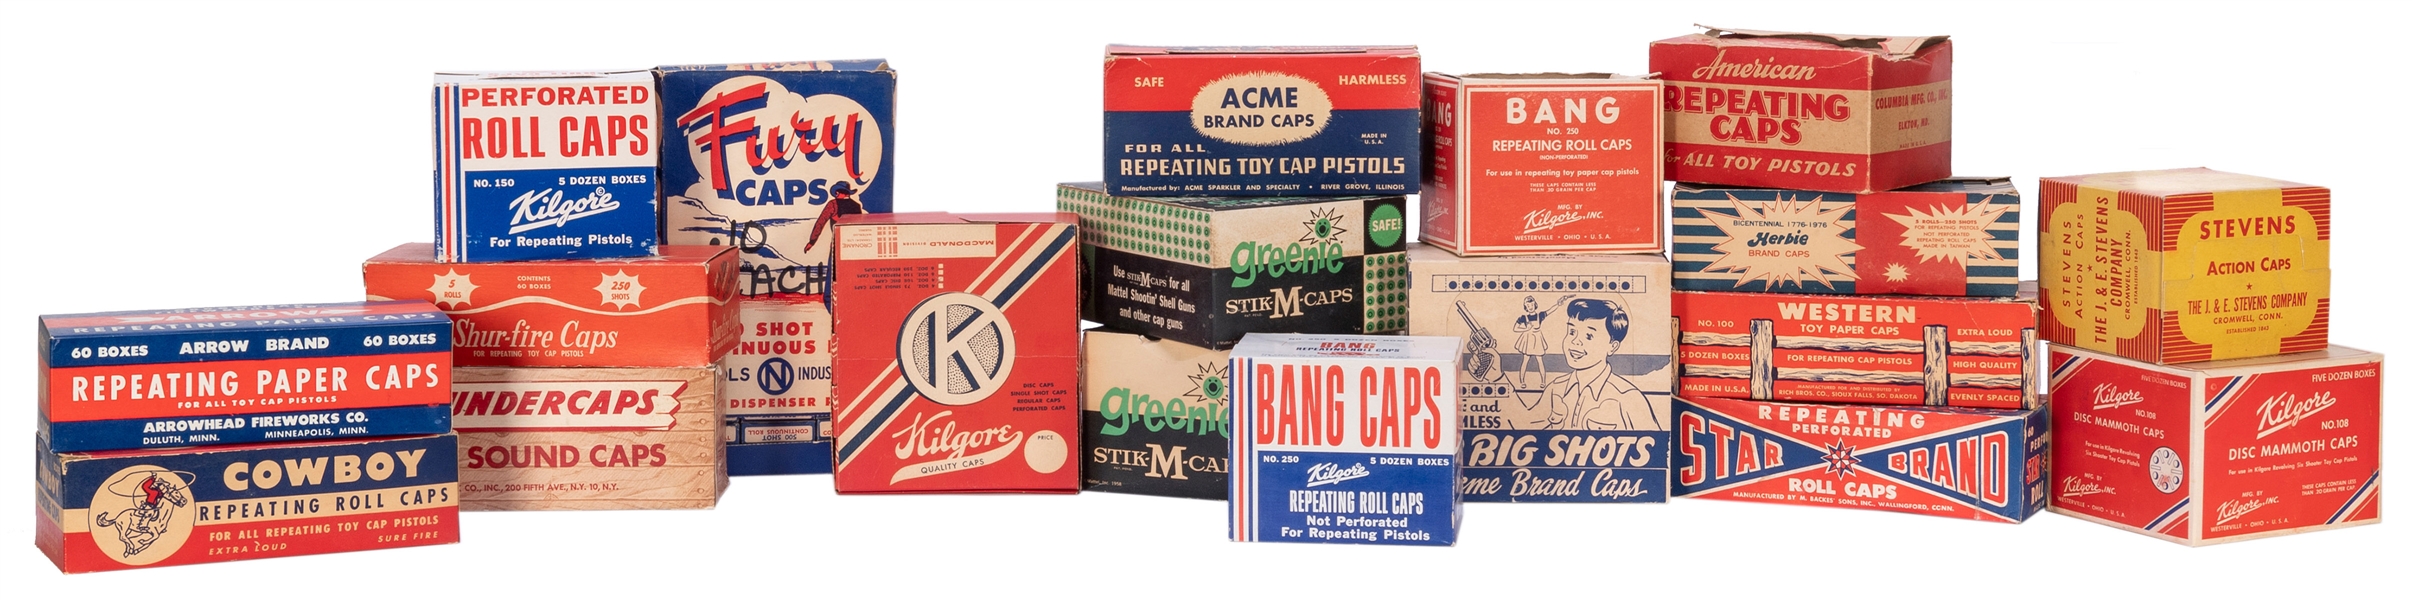  [CAP GUNS]. Collection of Store Display Boxes of Western To...